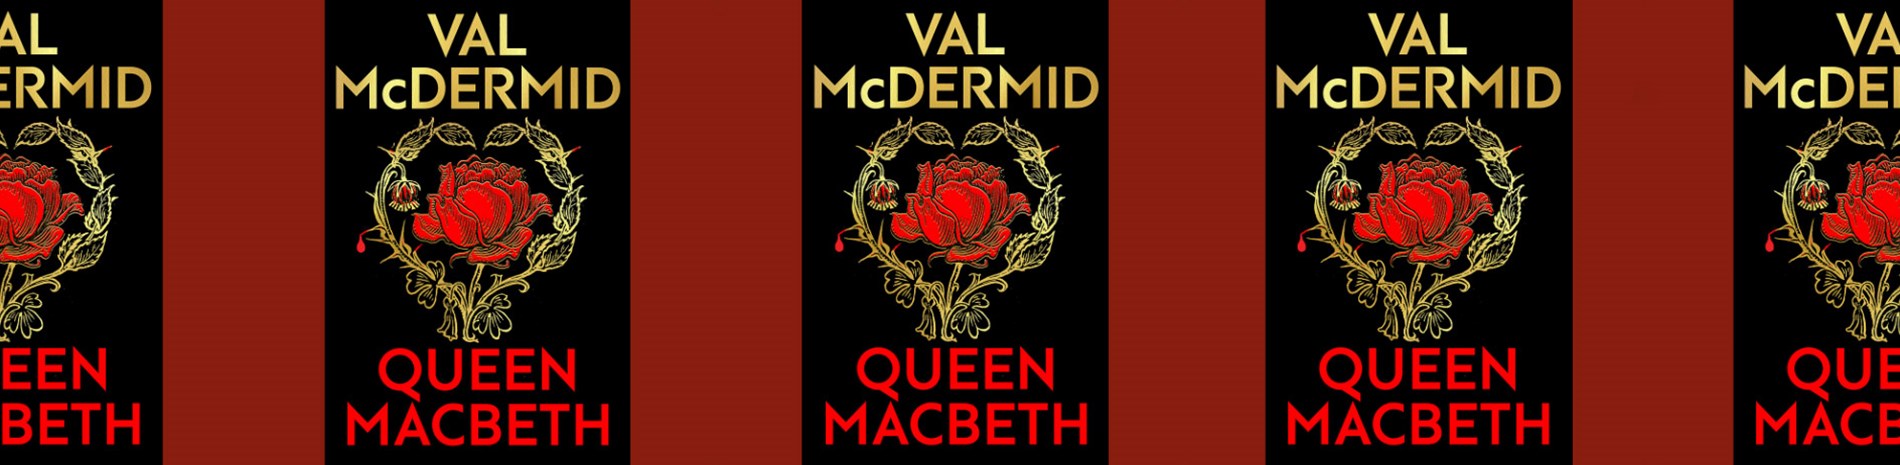 The cover of Val McDermid’s new book, 'Queen MacBeth', repeated five times over a royal red background. The cover contains a graphic of a red rose surrounded by thorns, one of which is pricked with blood.